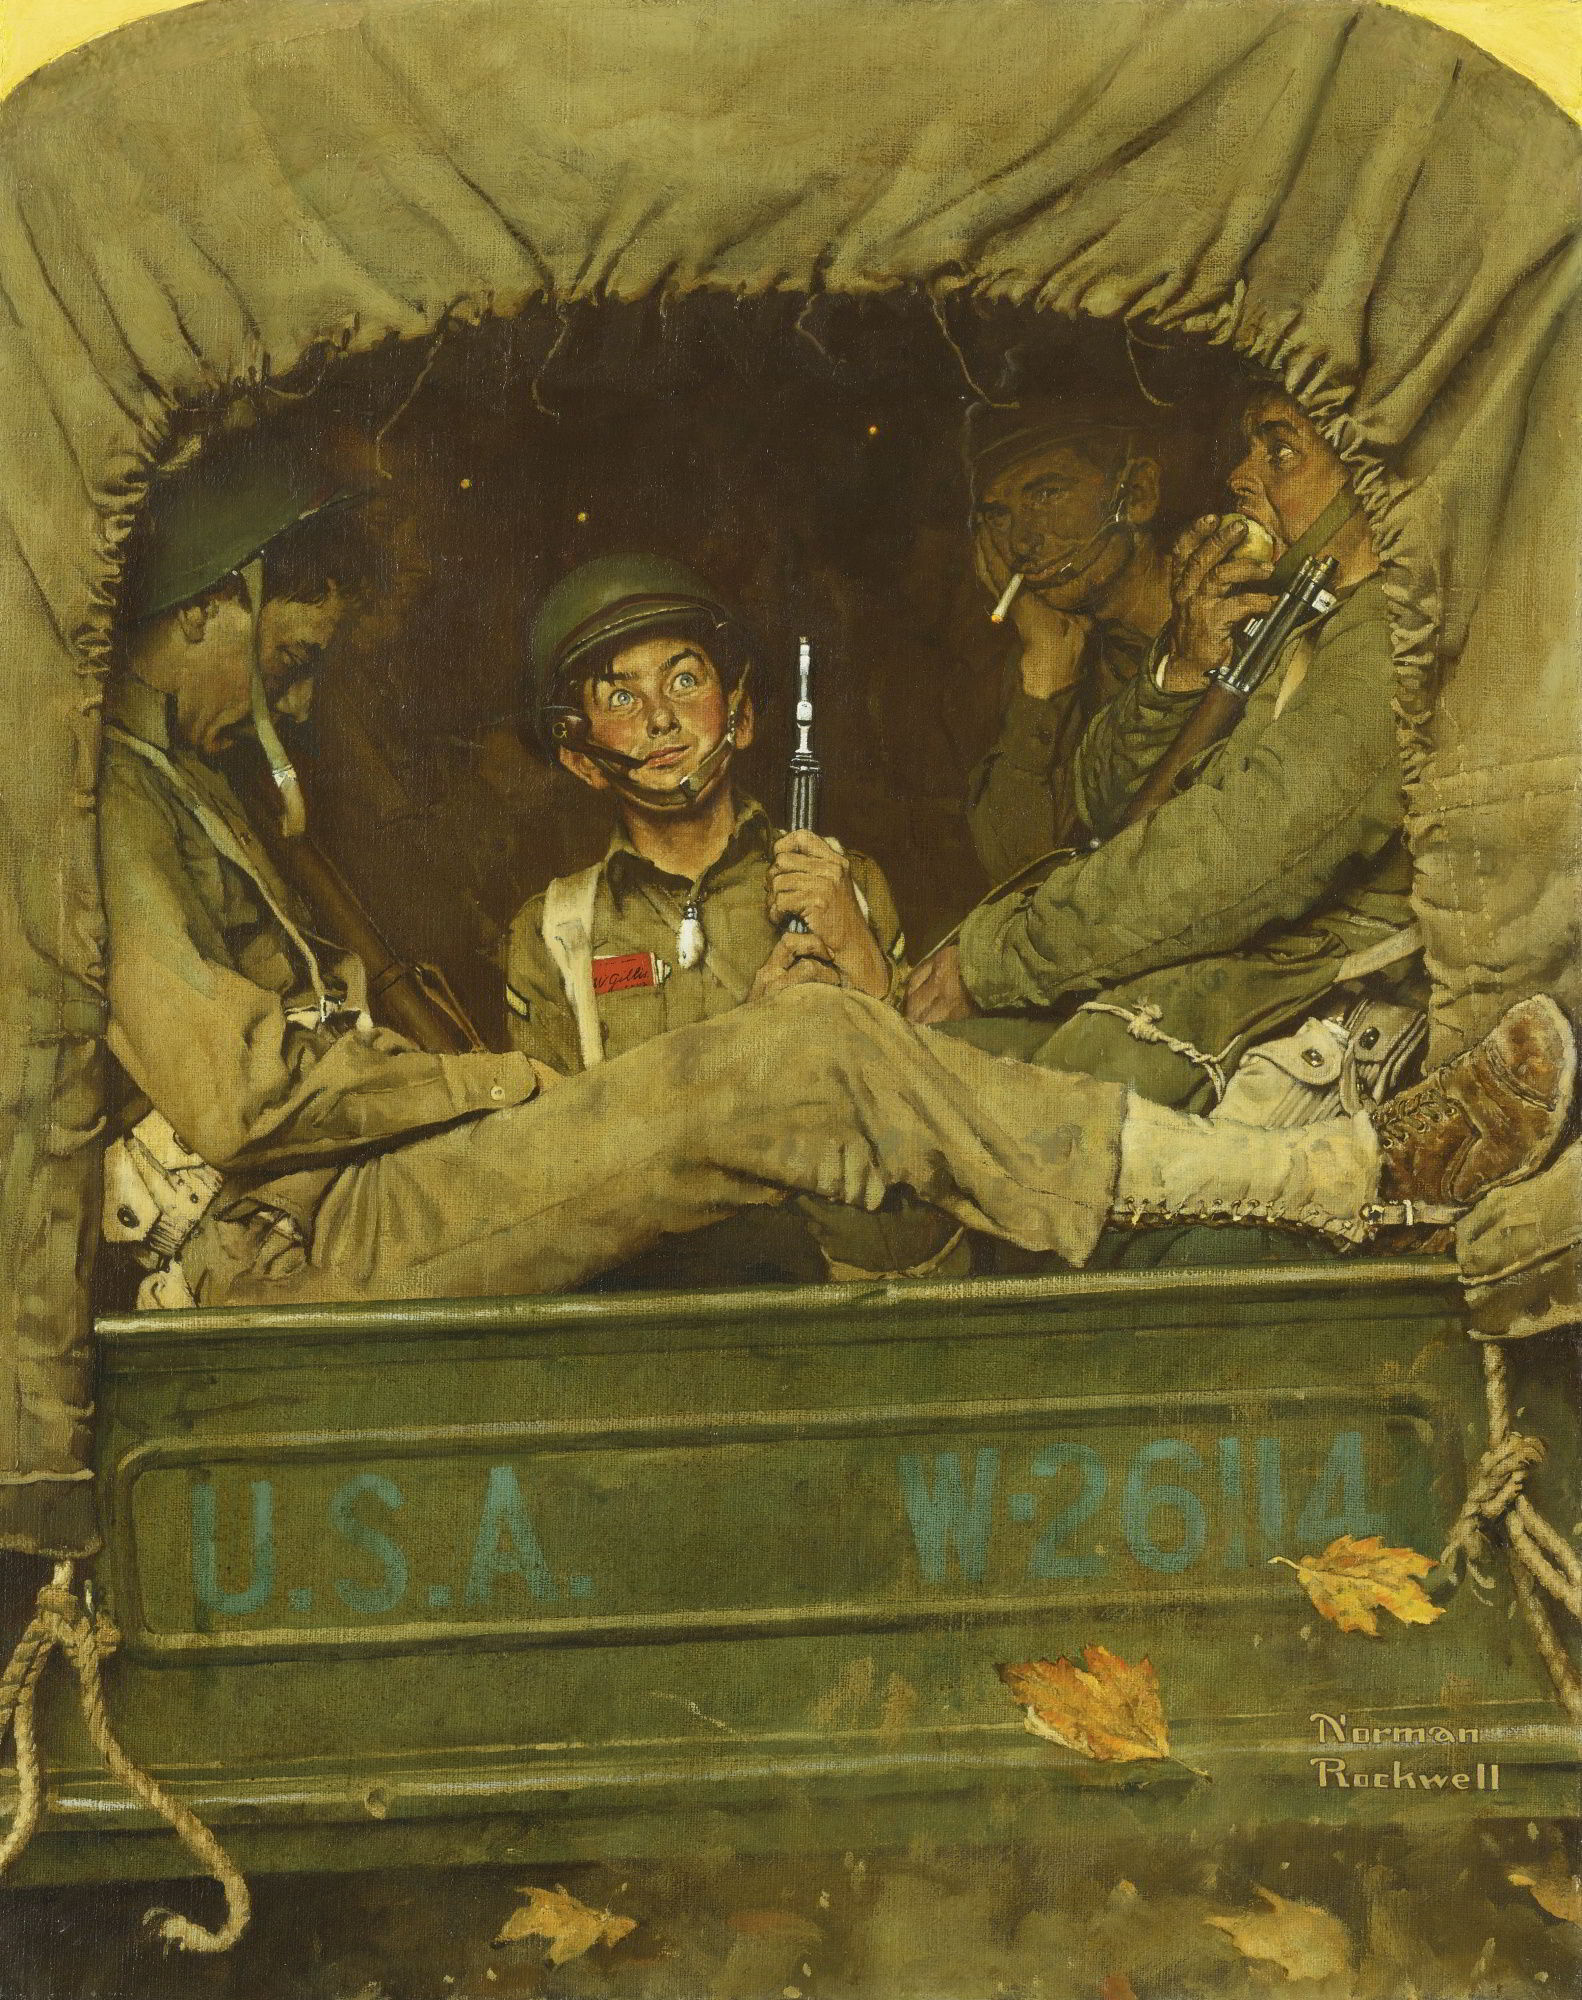 Willie Gillis in Convoy (1943) by Norman Rockwell